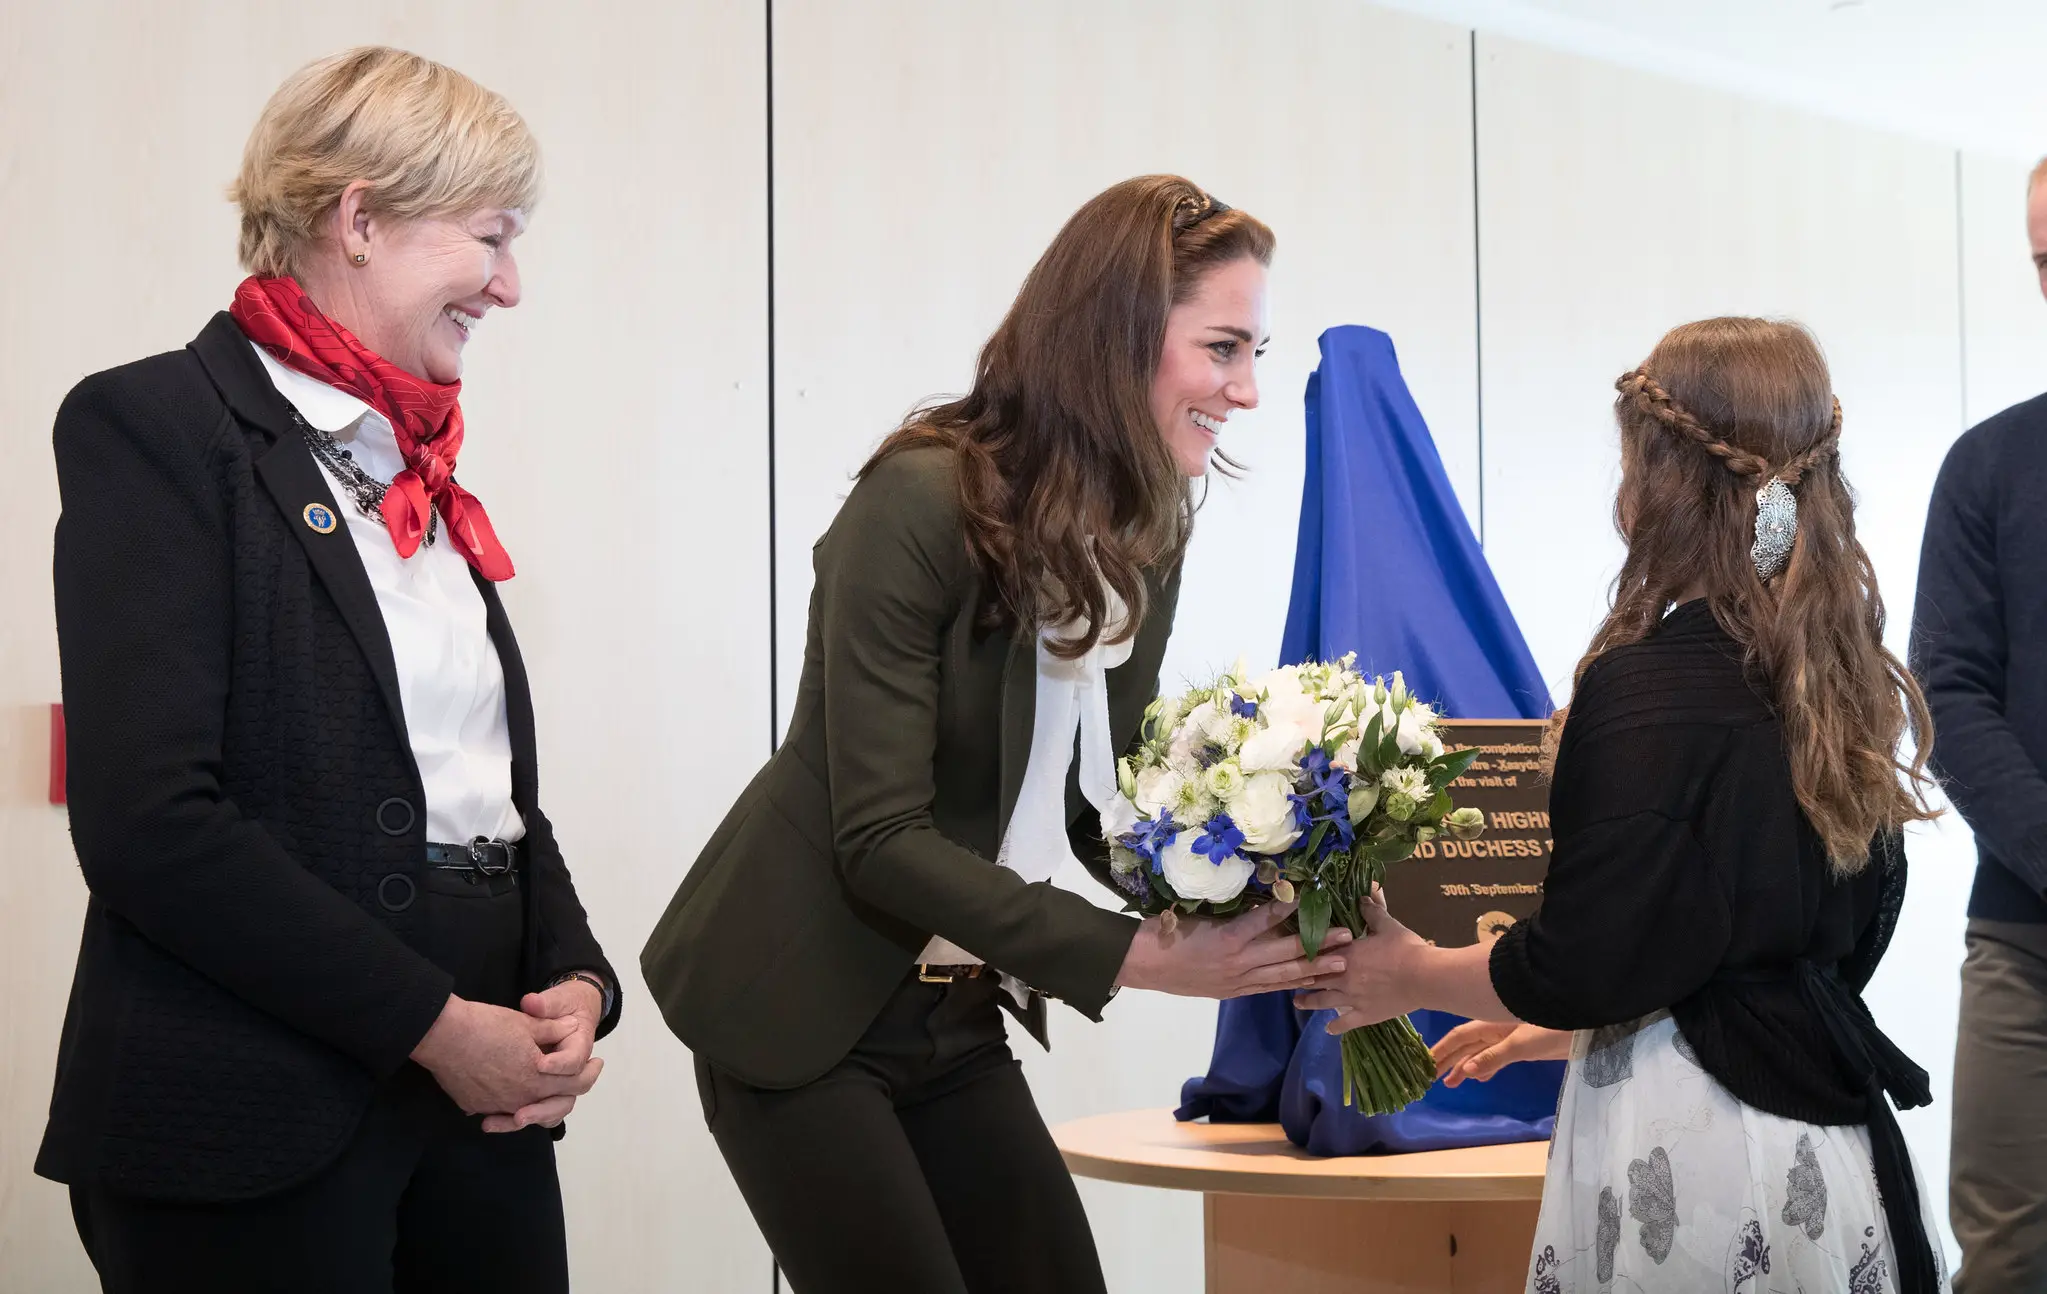 The Duchess of Cambridge recieved a floral welcome in Haida Gwaii